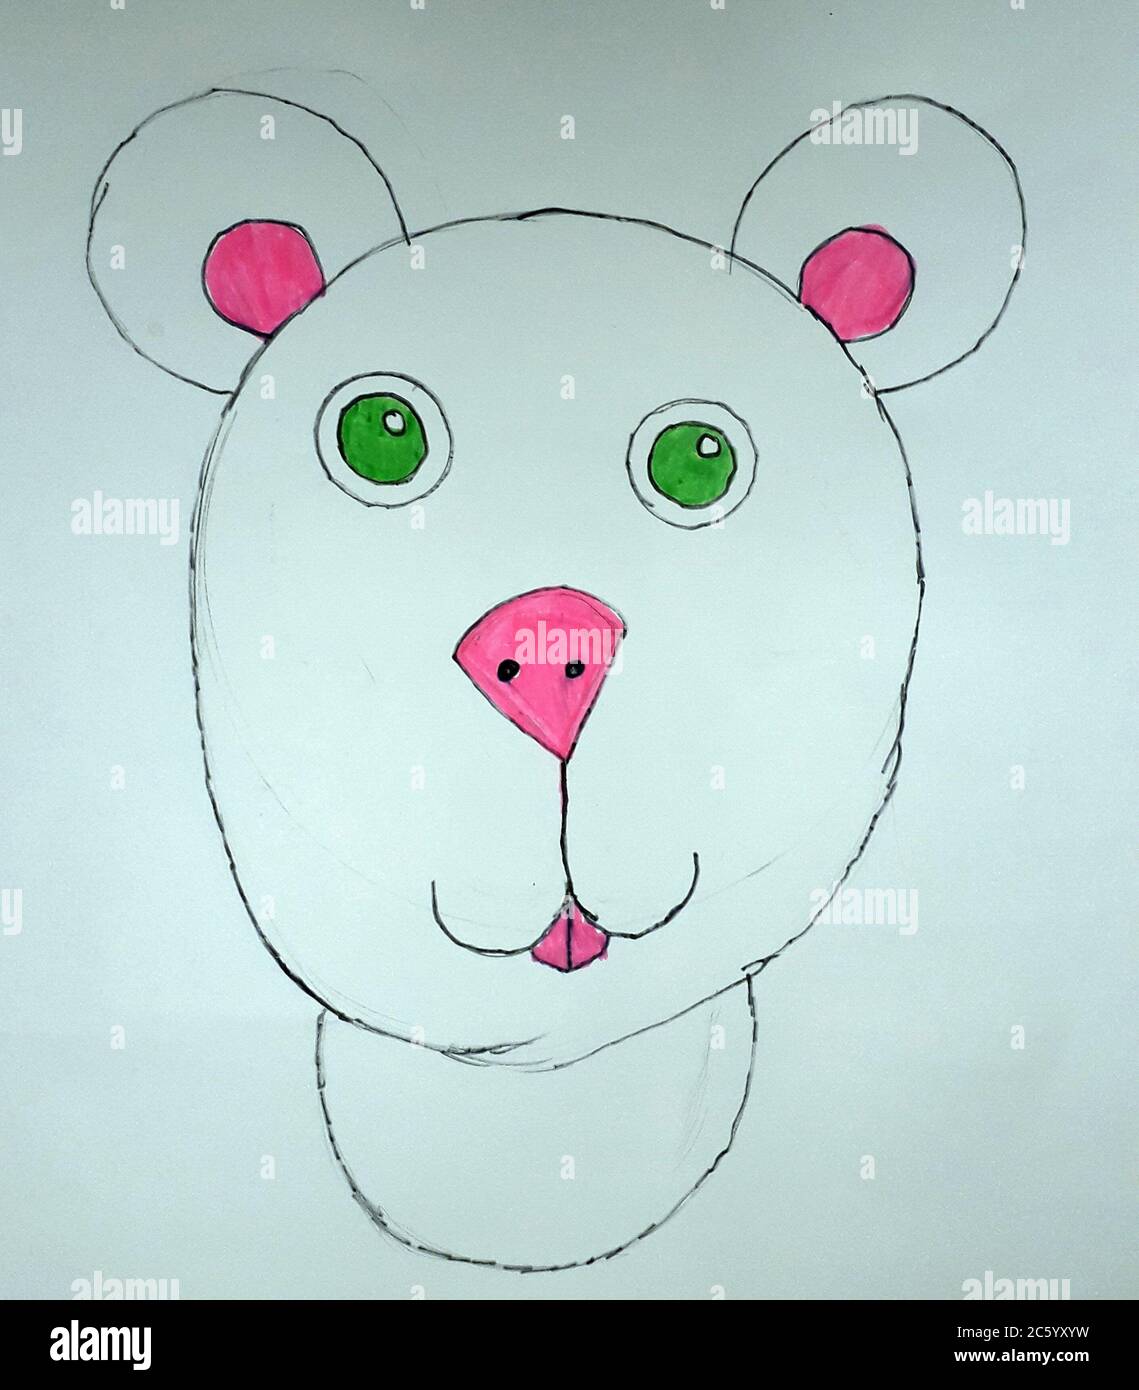 Teddy the bear children's the drawing Stock Photo - Alamy